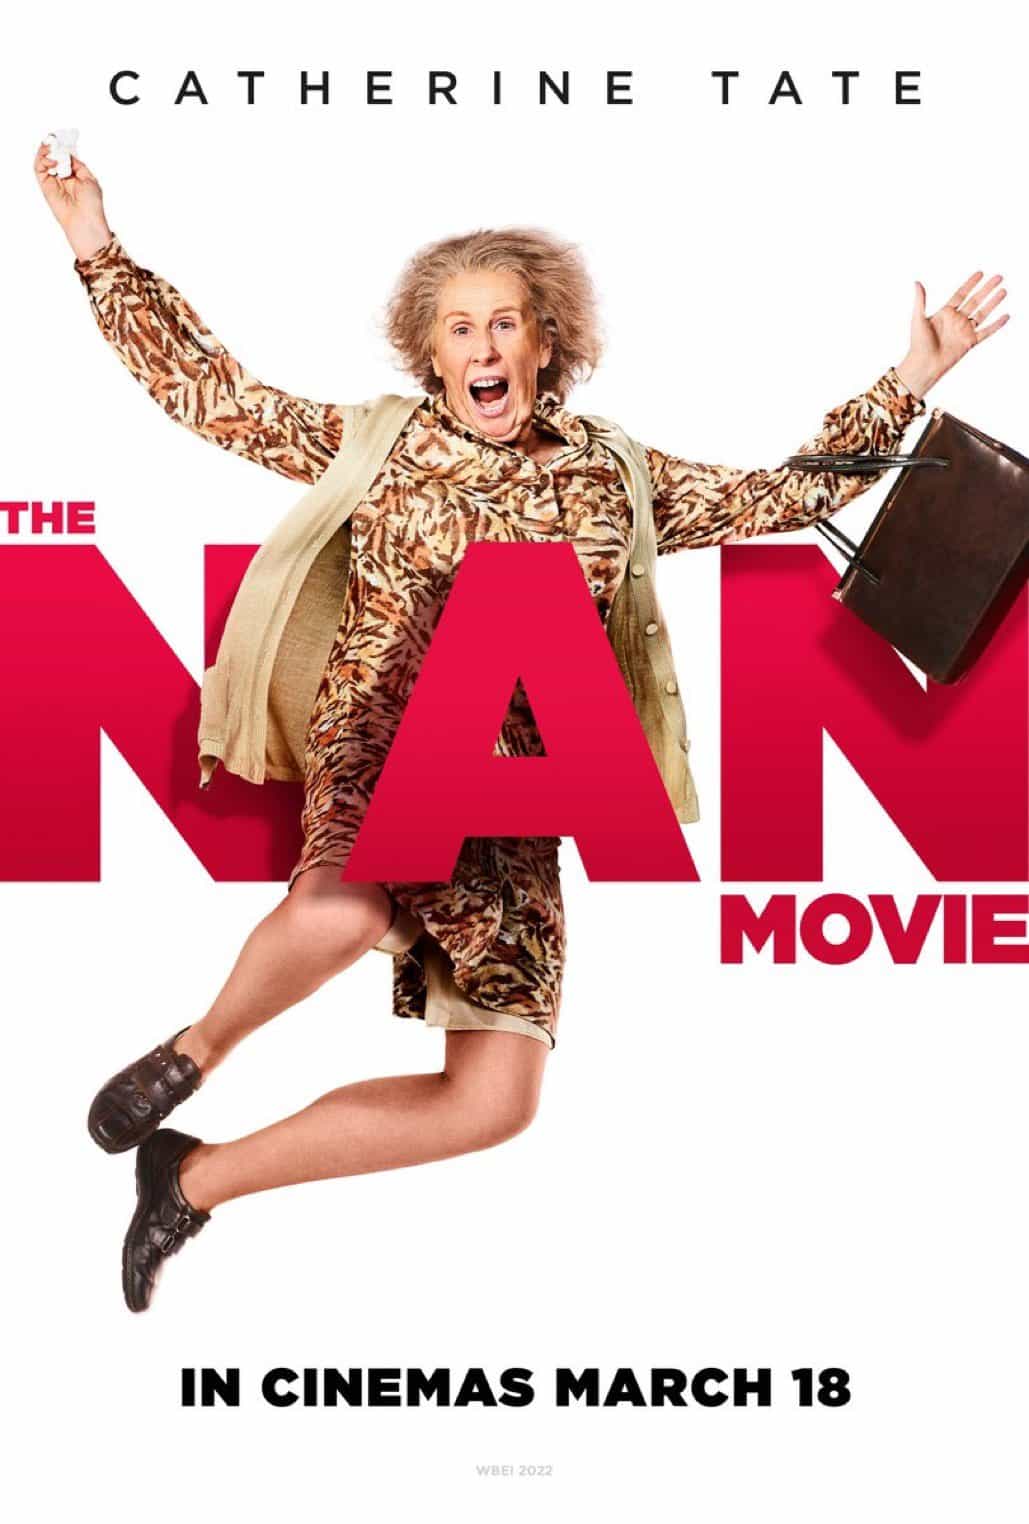 New trailer and poster released for The Nan Movie starring Catherine Tate - UK release date 18th March 2022 #thenanmovie